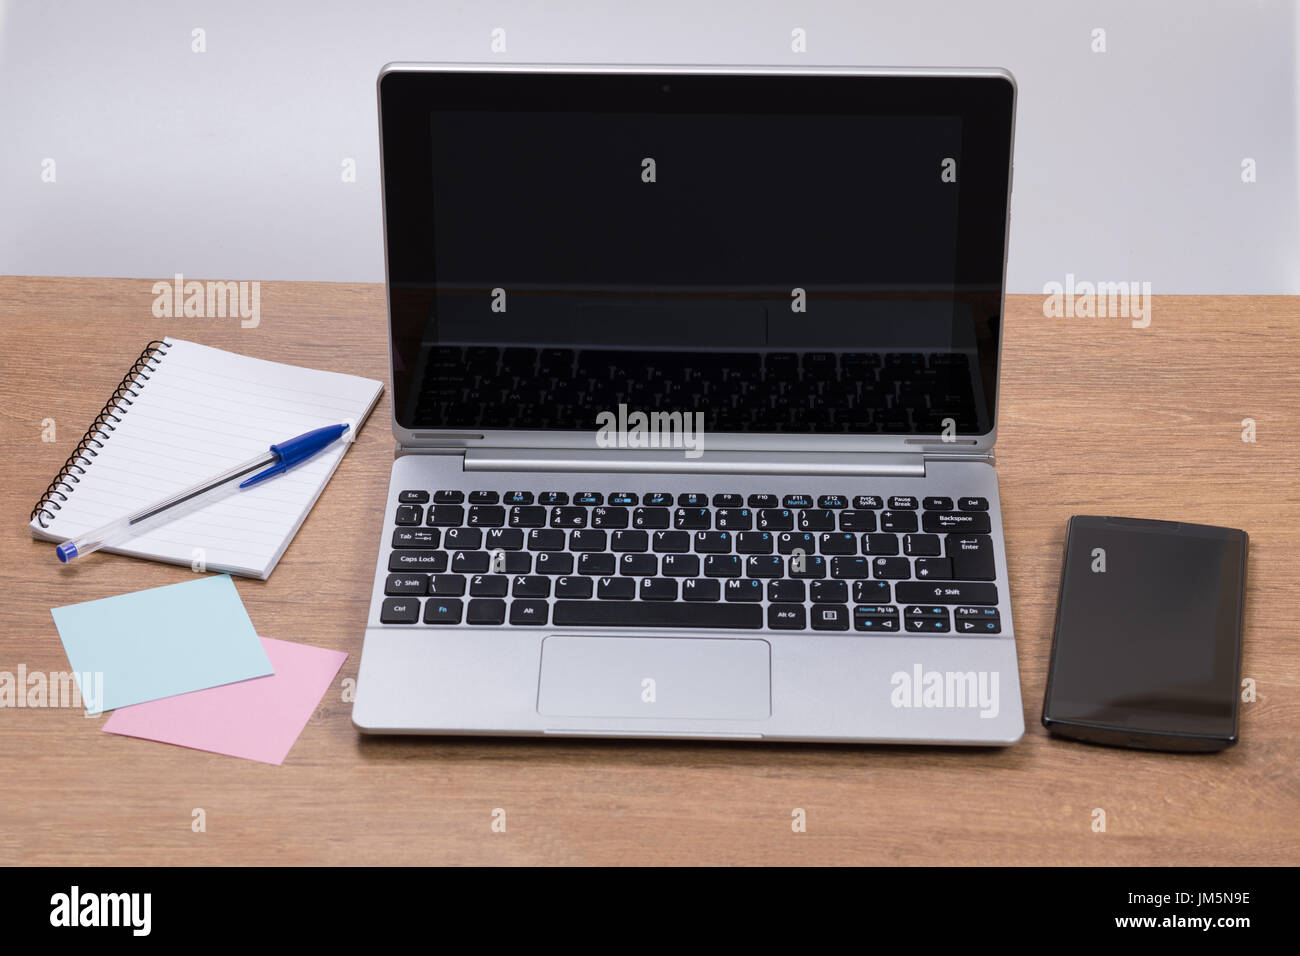 Neat workstation in an office with laptop computer and mobile phone together with blank memo notes and a spiral bound notepad and pen Stock Photo